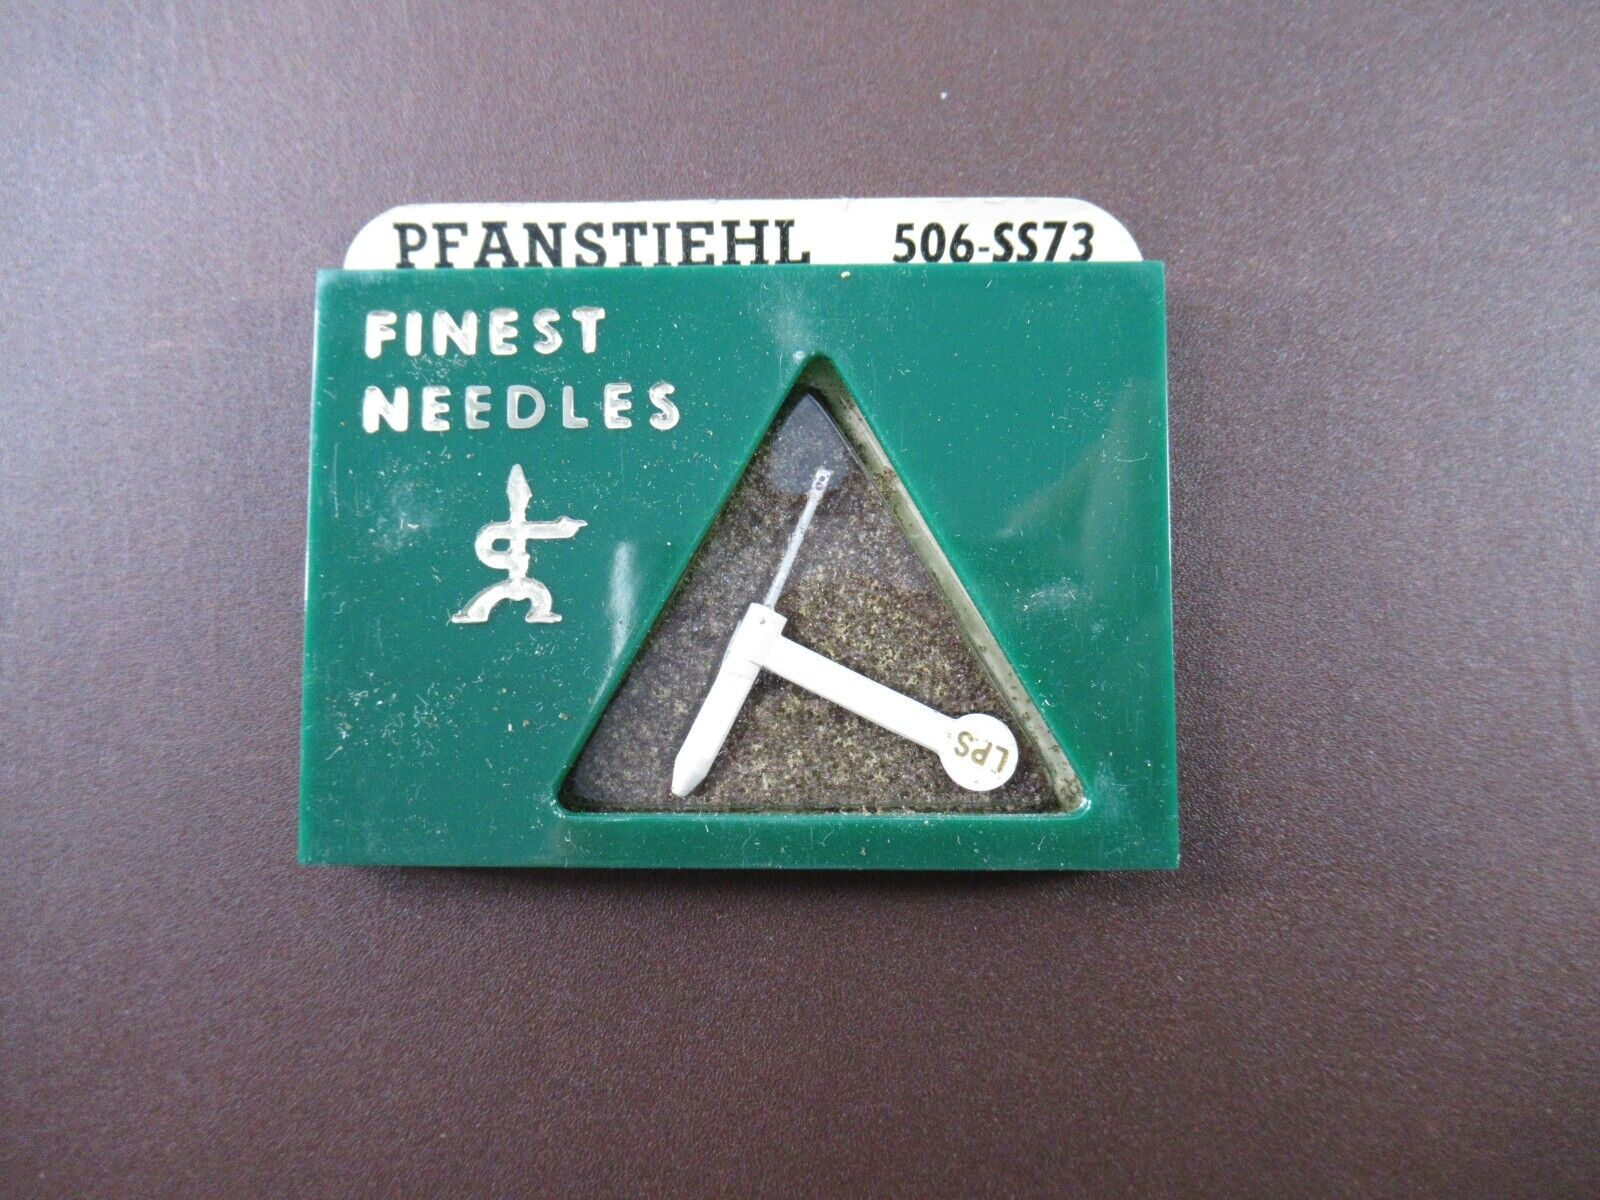 PFANSTIEHL Synthetic Sapphire Phono Needle 506-SS73, GE RS8235, RS4154, New (JB)